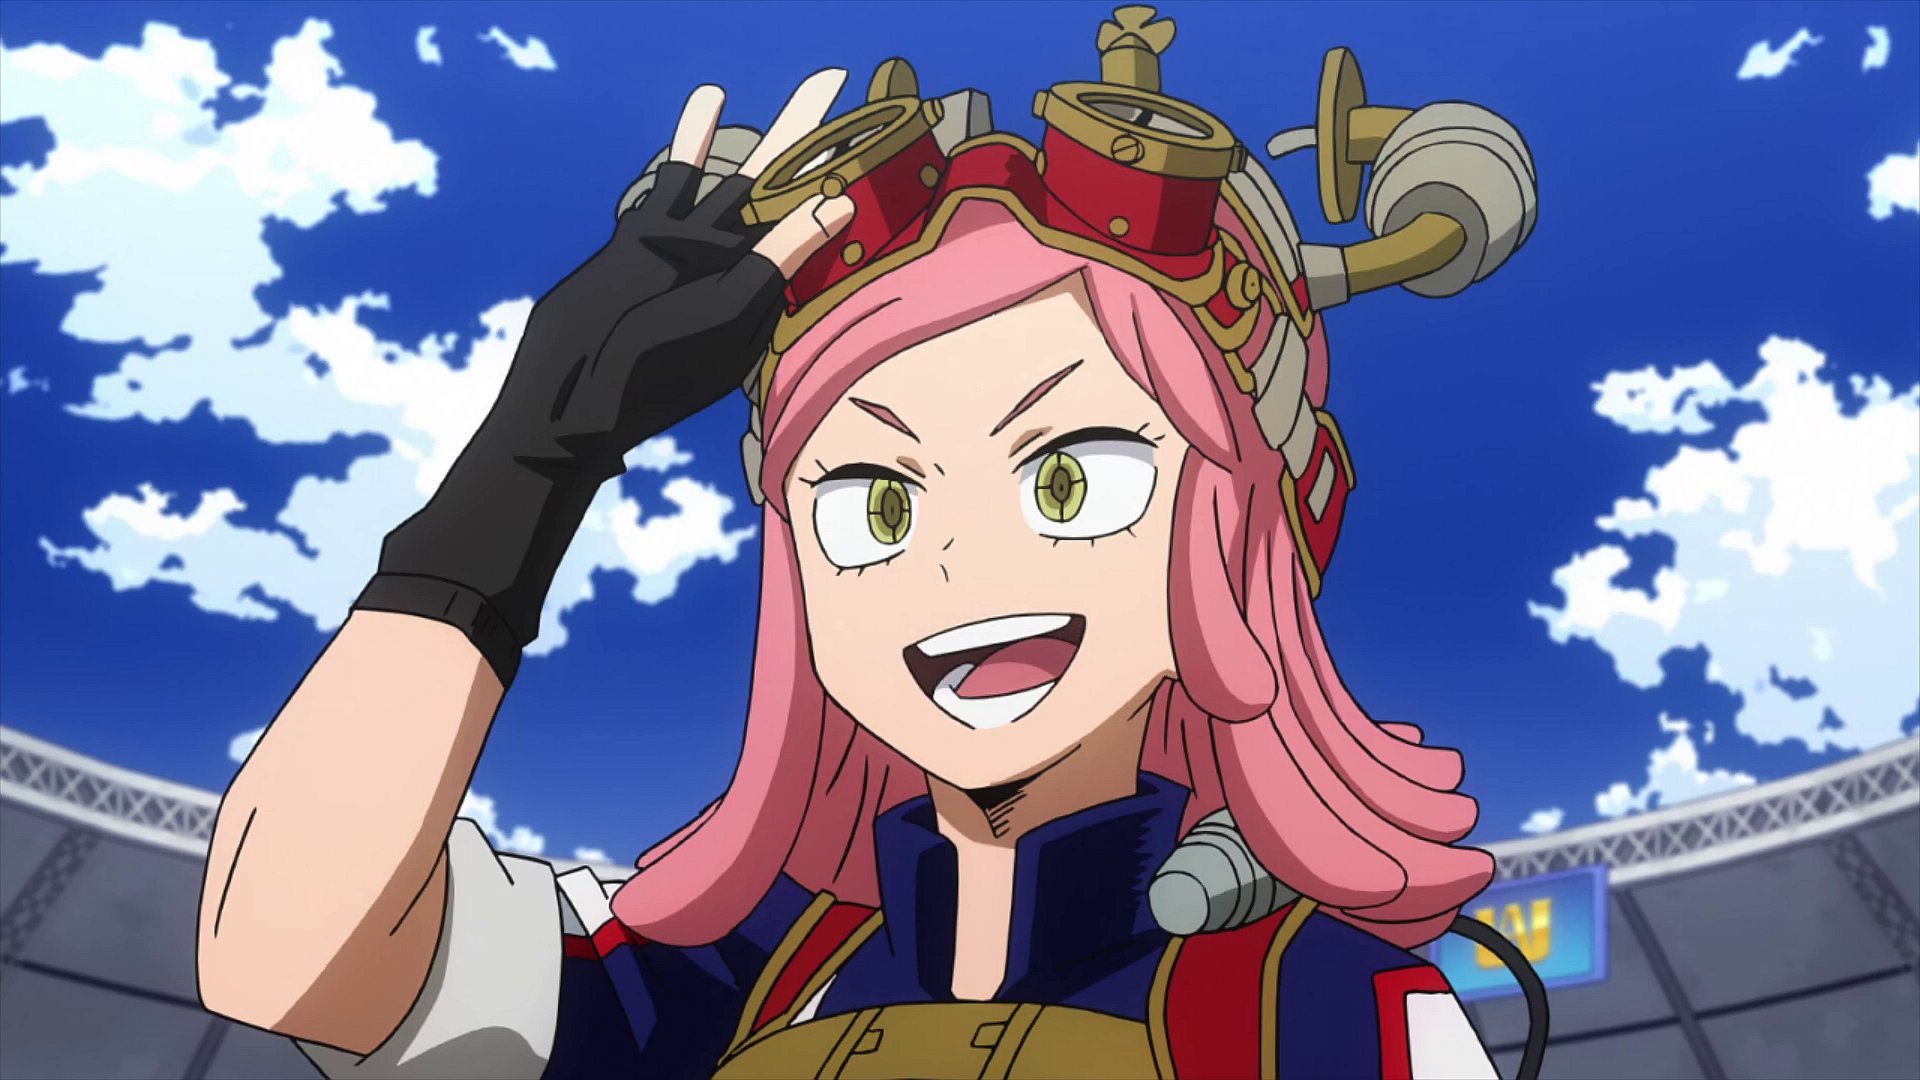 Reference Emporium on X: Screenshots of Mei Hatsume from My Hero Academia.  Albums t.co3dduNYW7he or t.coFFYcE6P1Gb  t.coTIaVSroKZI  X